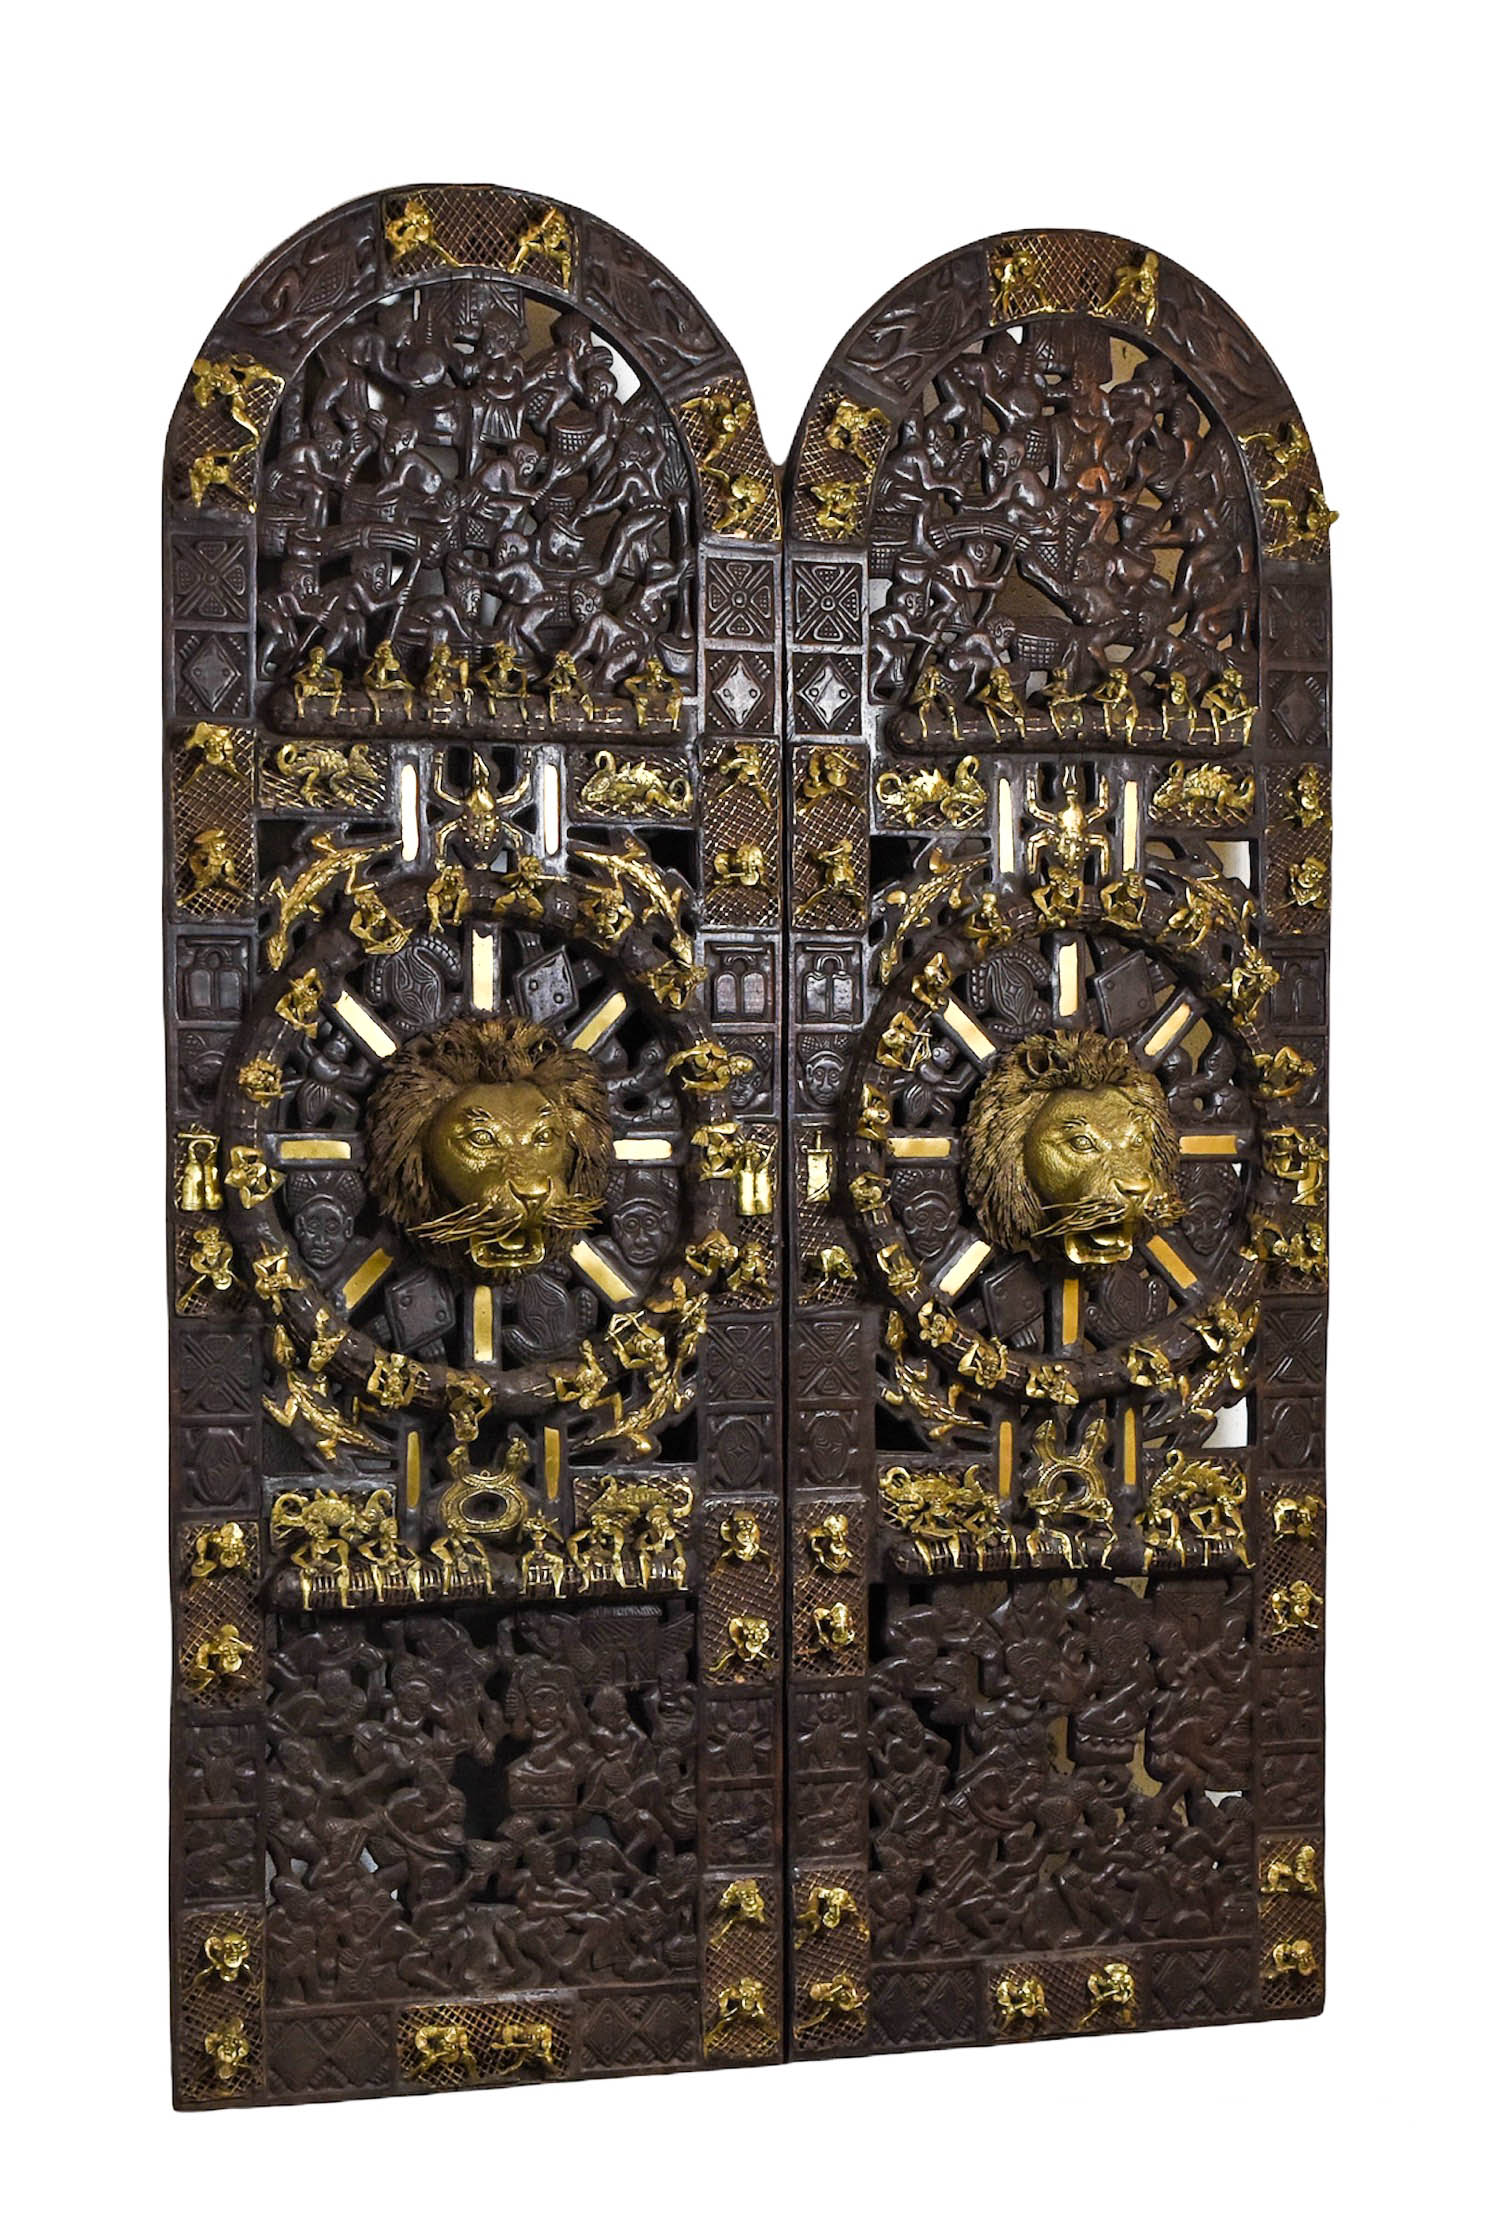 Yaounde Bronze and Carved Wood Royal Palace Doors